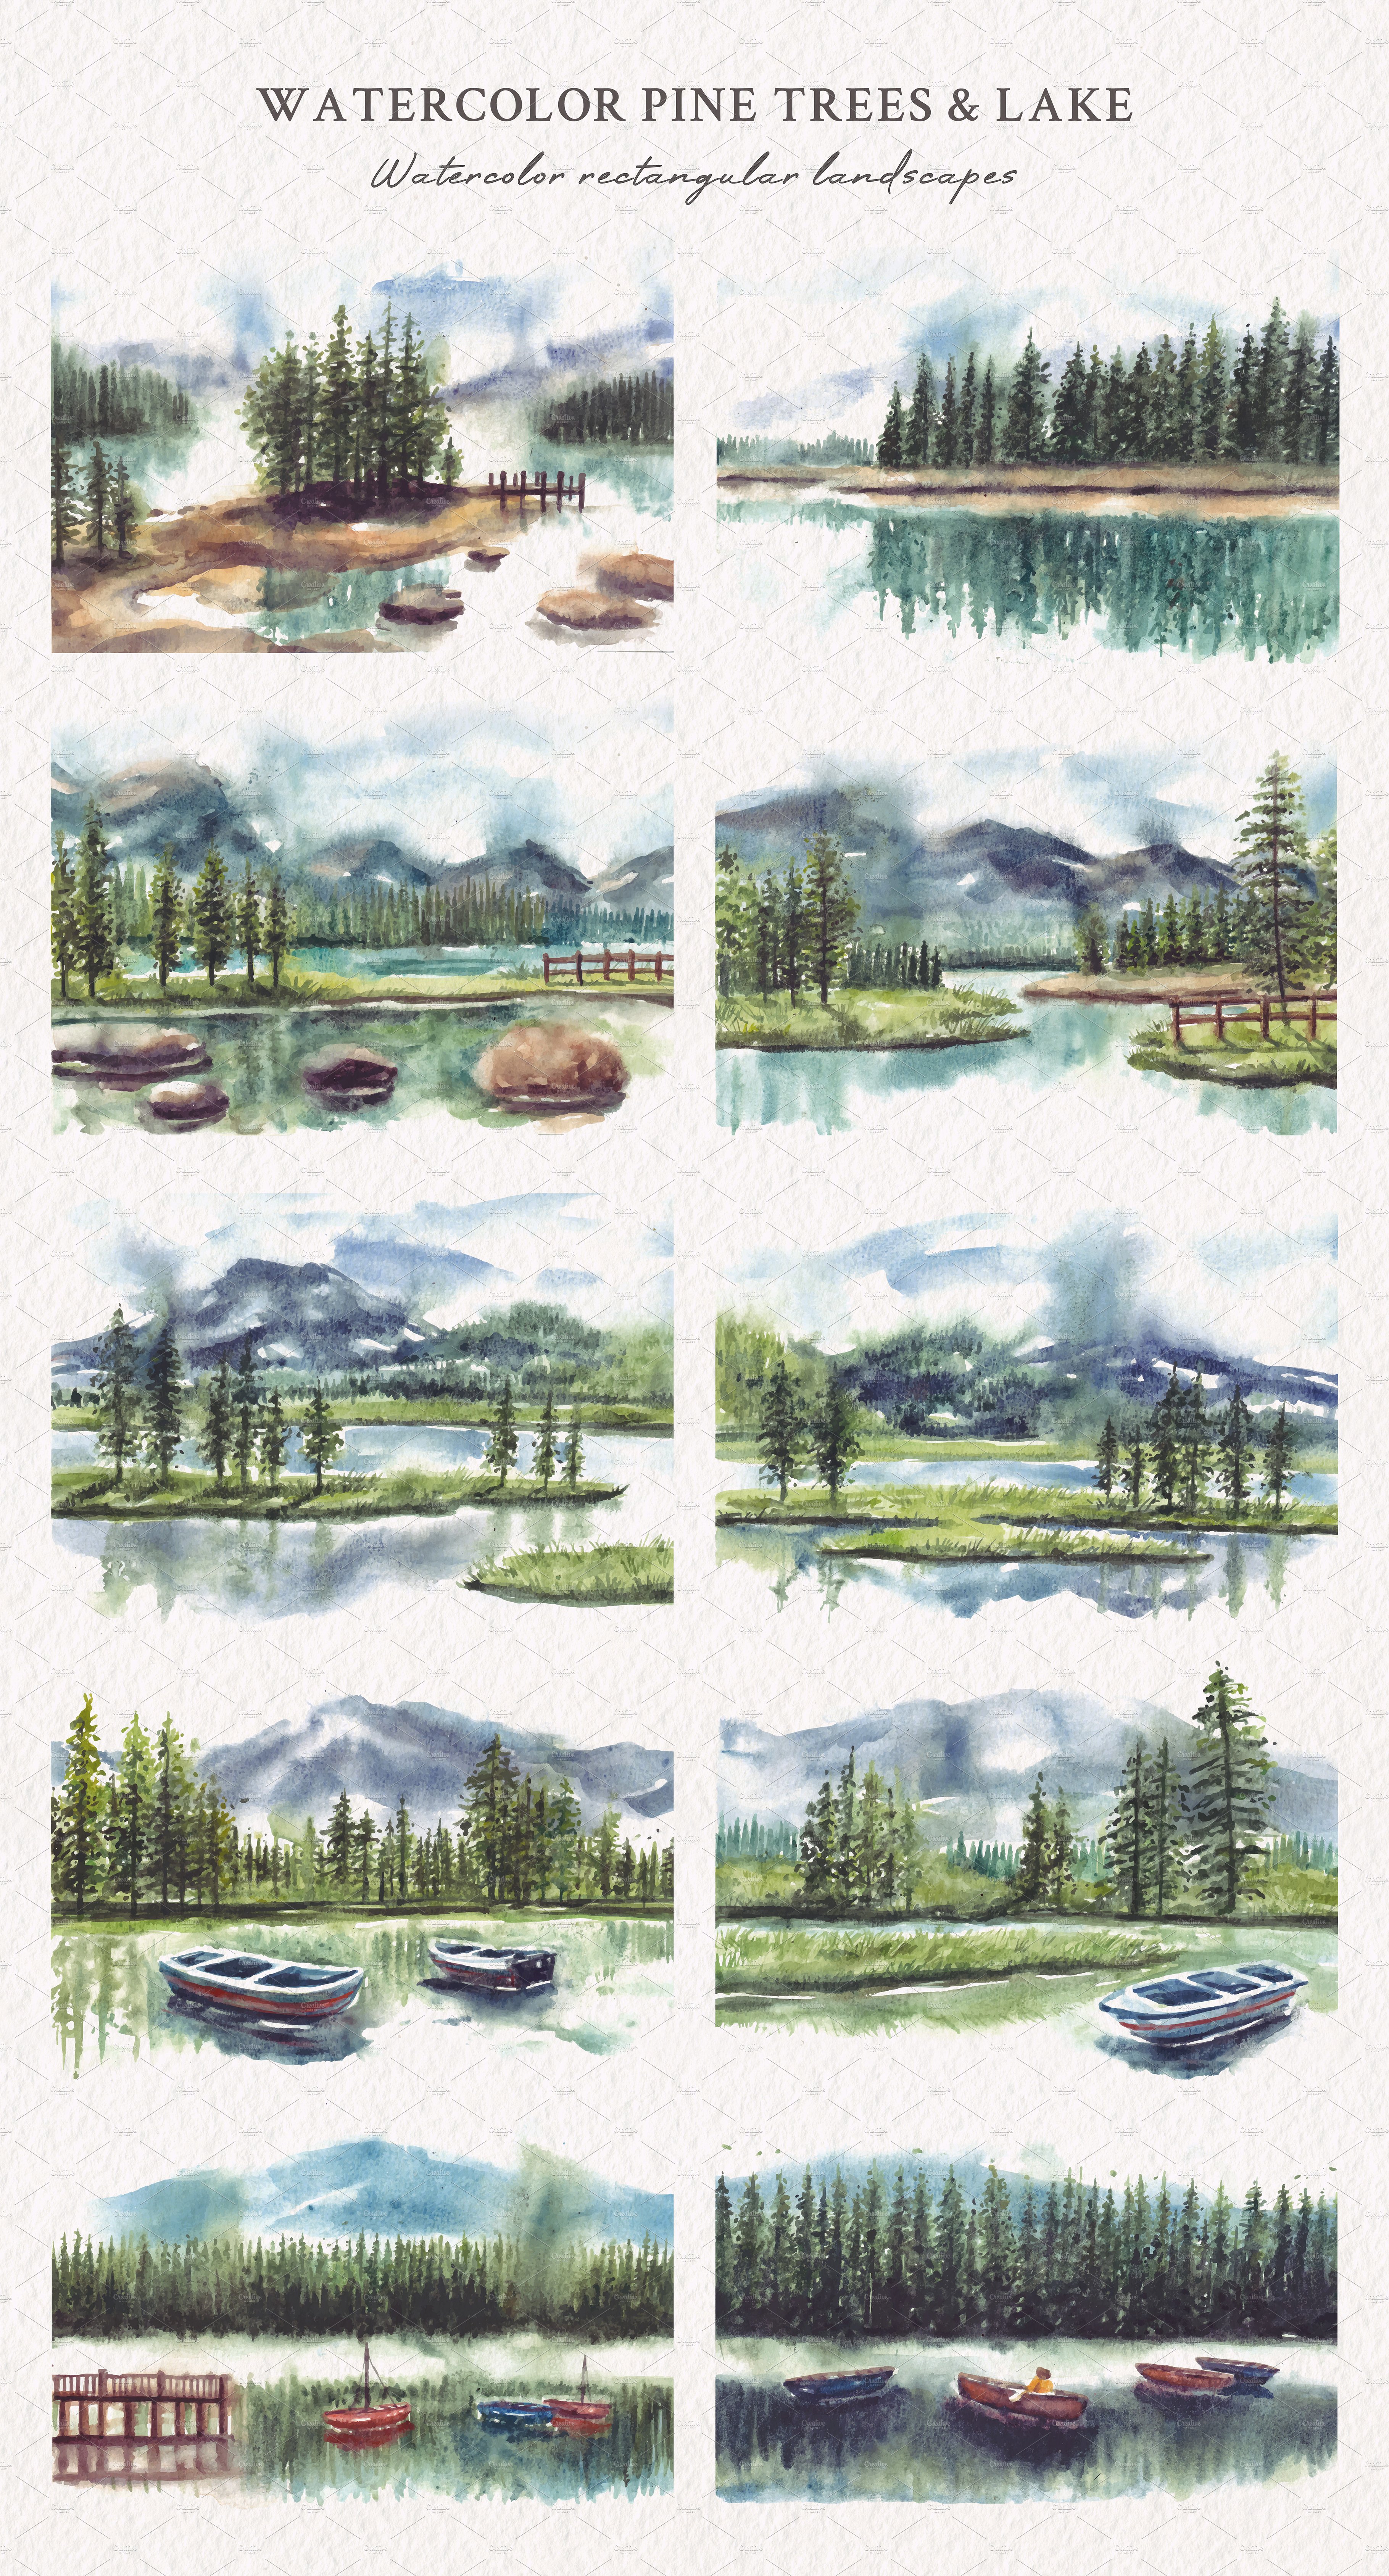 Watercolor painting of different types of trees and boats.